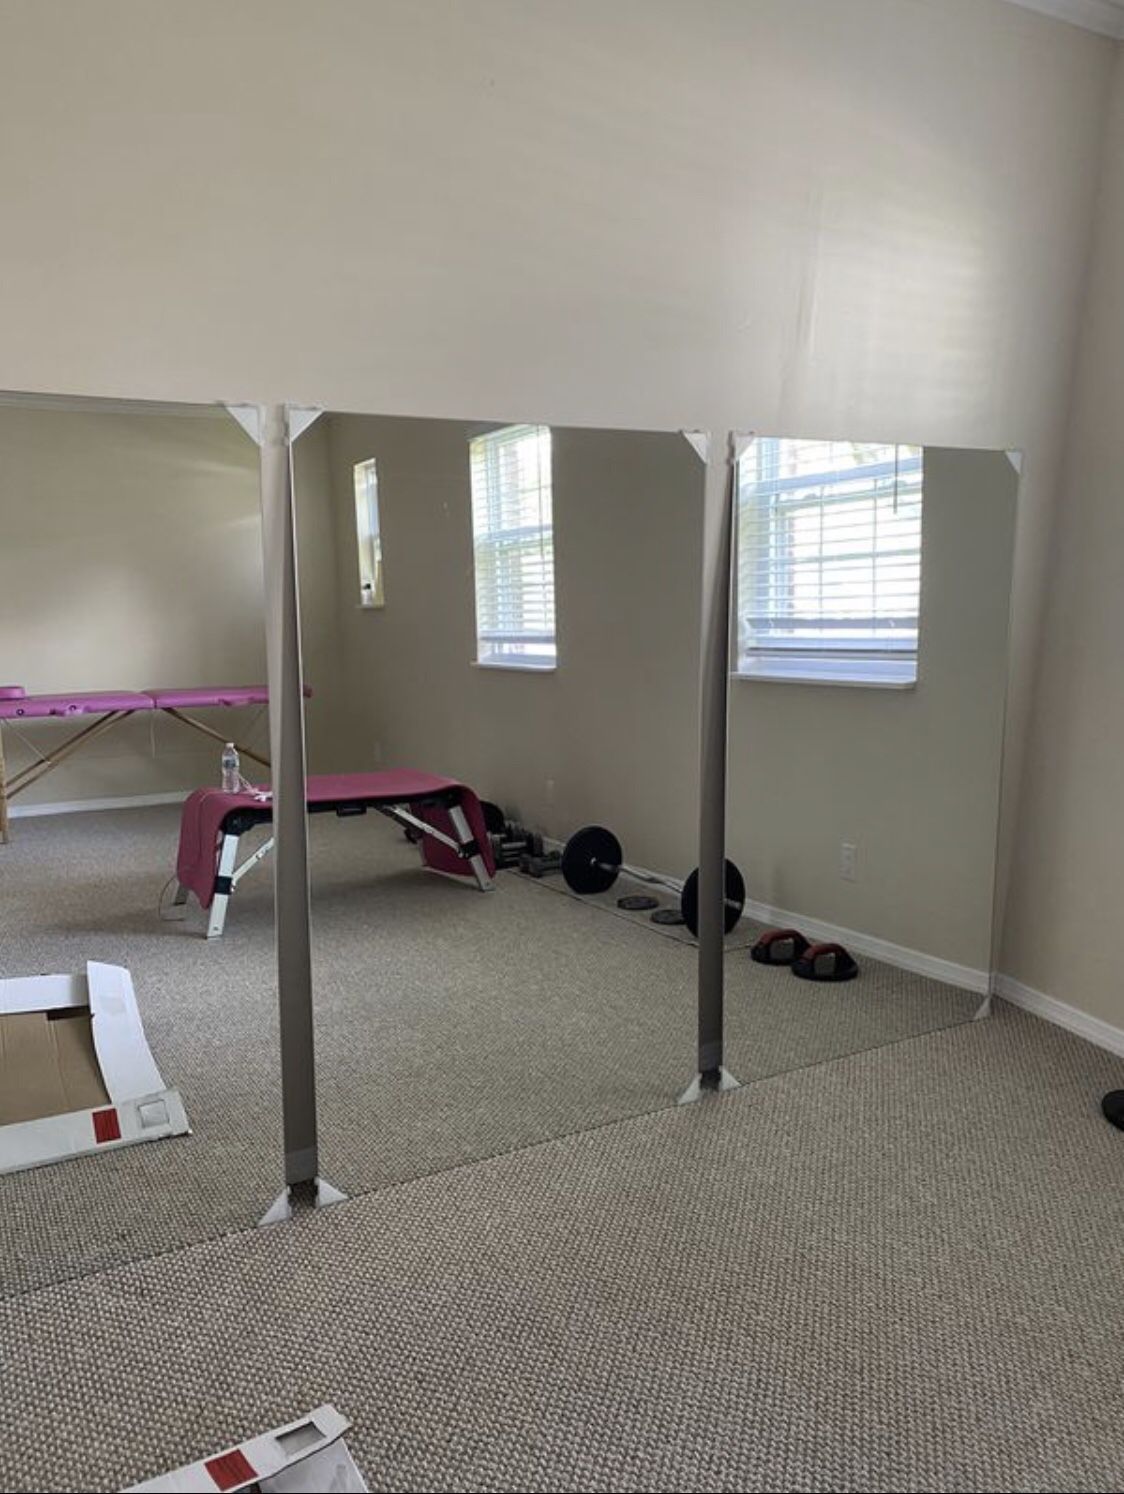 Mirrors with wall mounts 3x5 ft- perfect for home gym, dance studio